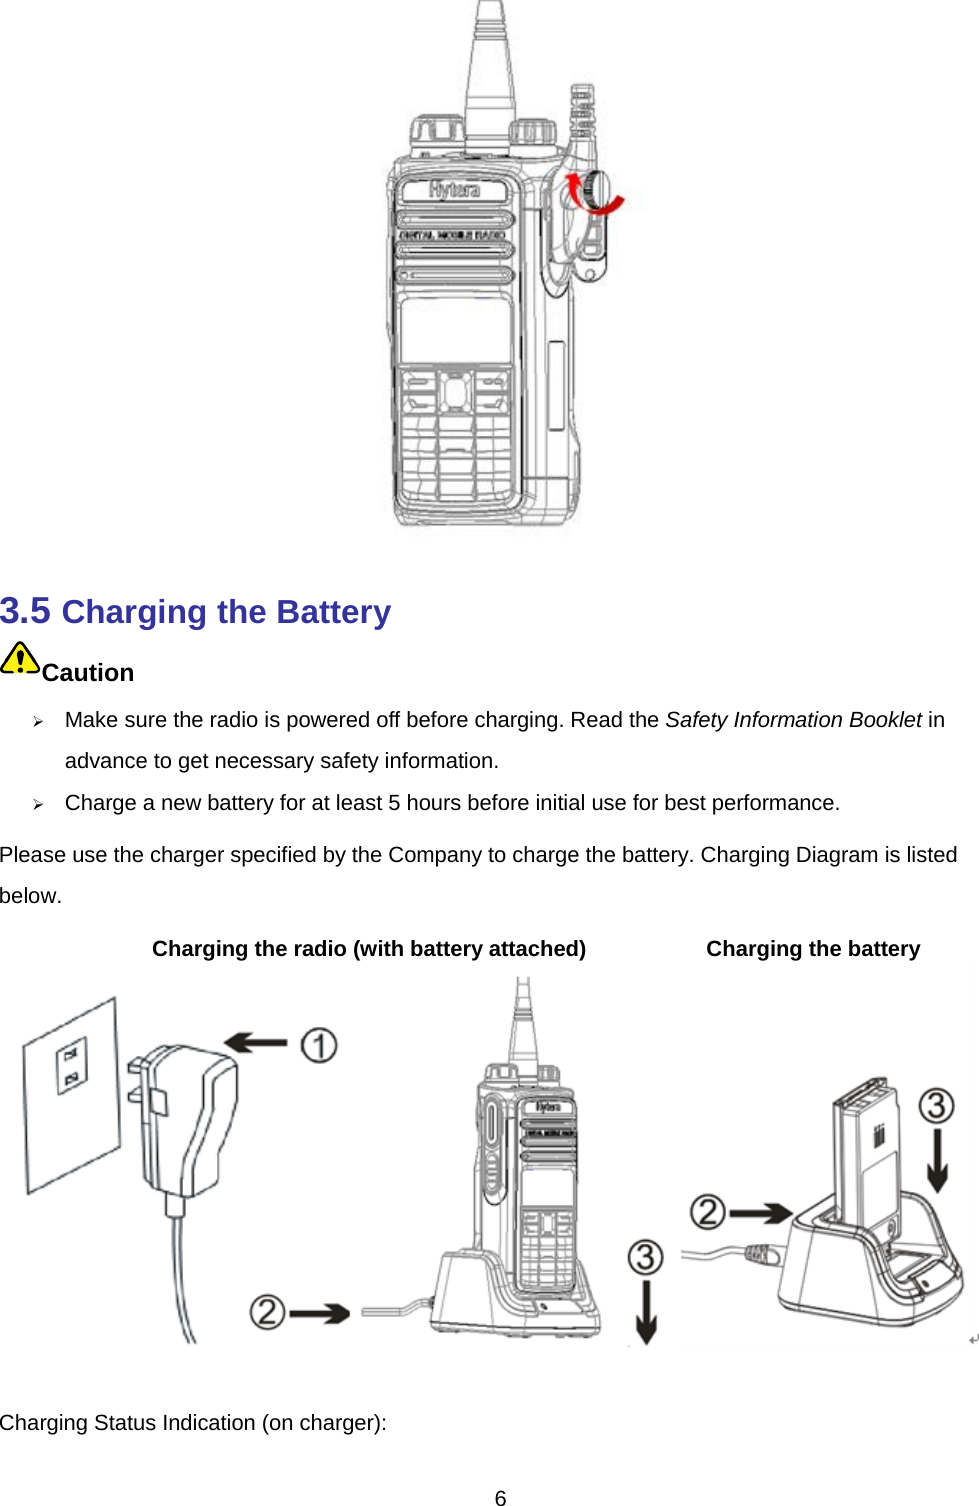   3.5 Charging the Battery 7TCaution  10TMake sure the radio is powered off before charging. Read the Safety Information Booklet in advance to get necessary safety information.    10TCharge a new battery for at least 5 hours before initial use for best performance. Please use the charger specified by the Company to charge the battery. Charging Diagram is listed below.           Charging the radio (with battery attached)           Charging the battery  Charging Status Indication (on charger):   6 